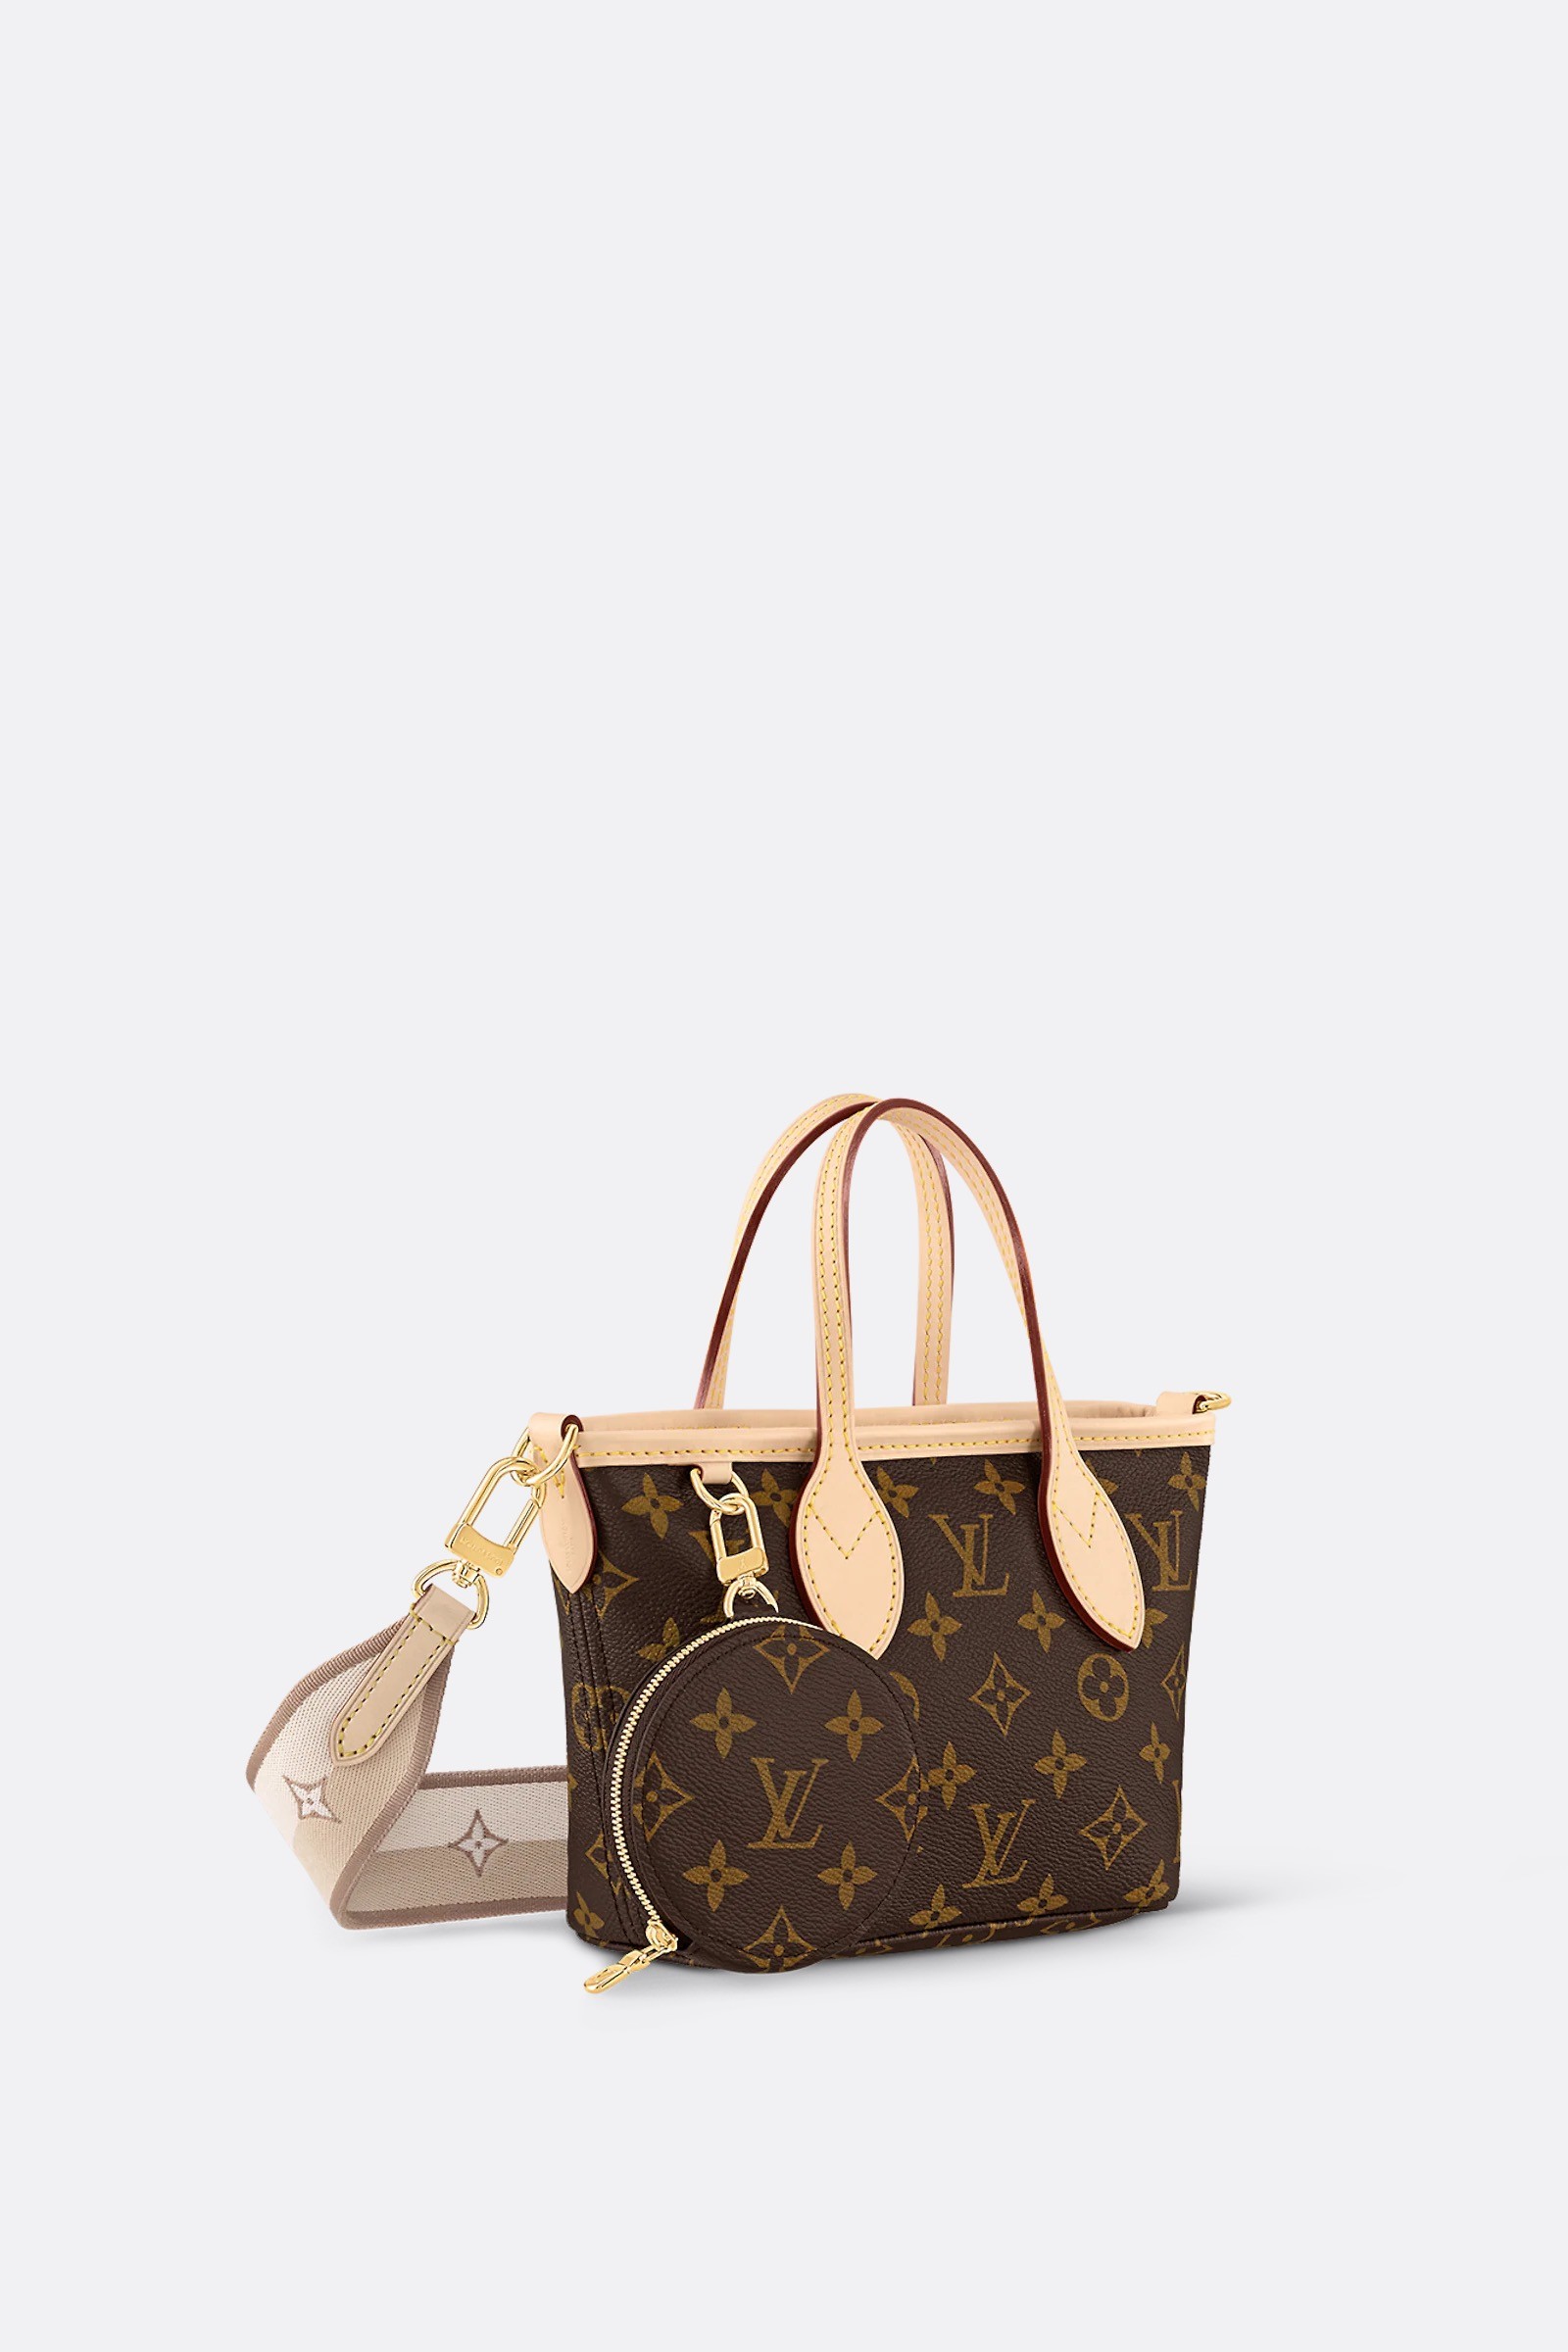 Louis Vuitton Alma GM Beige/Black in Cowhide Leather with Gold